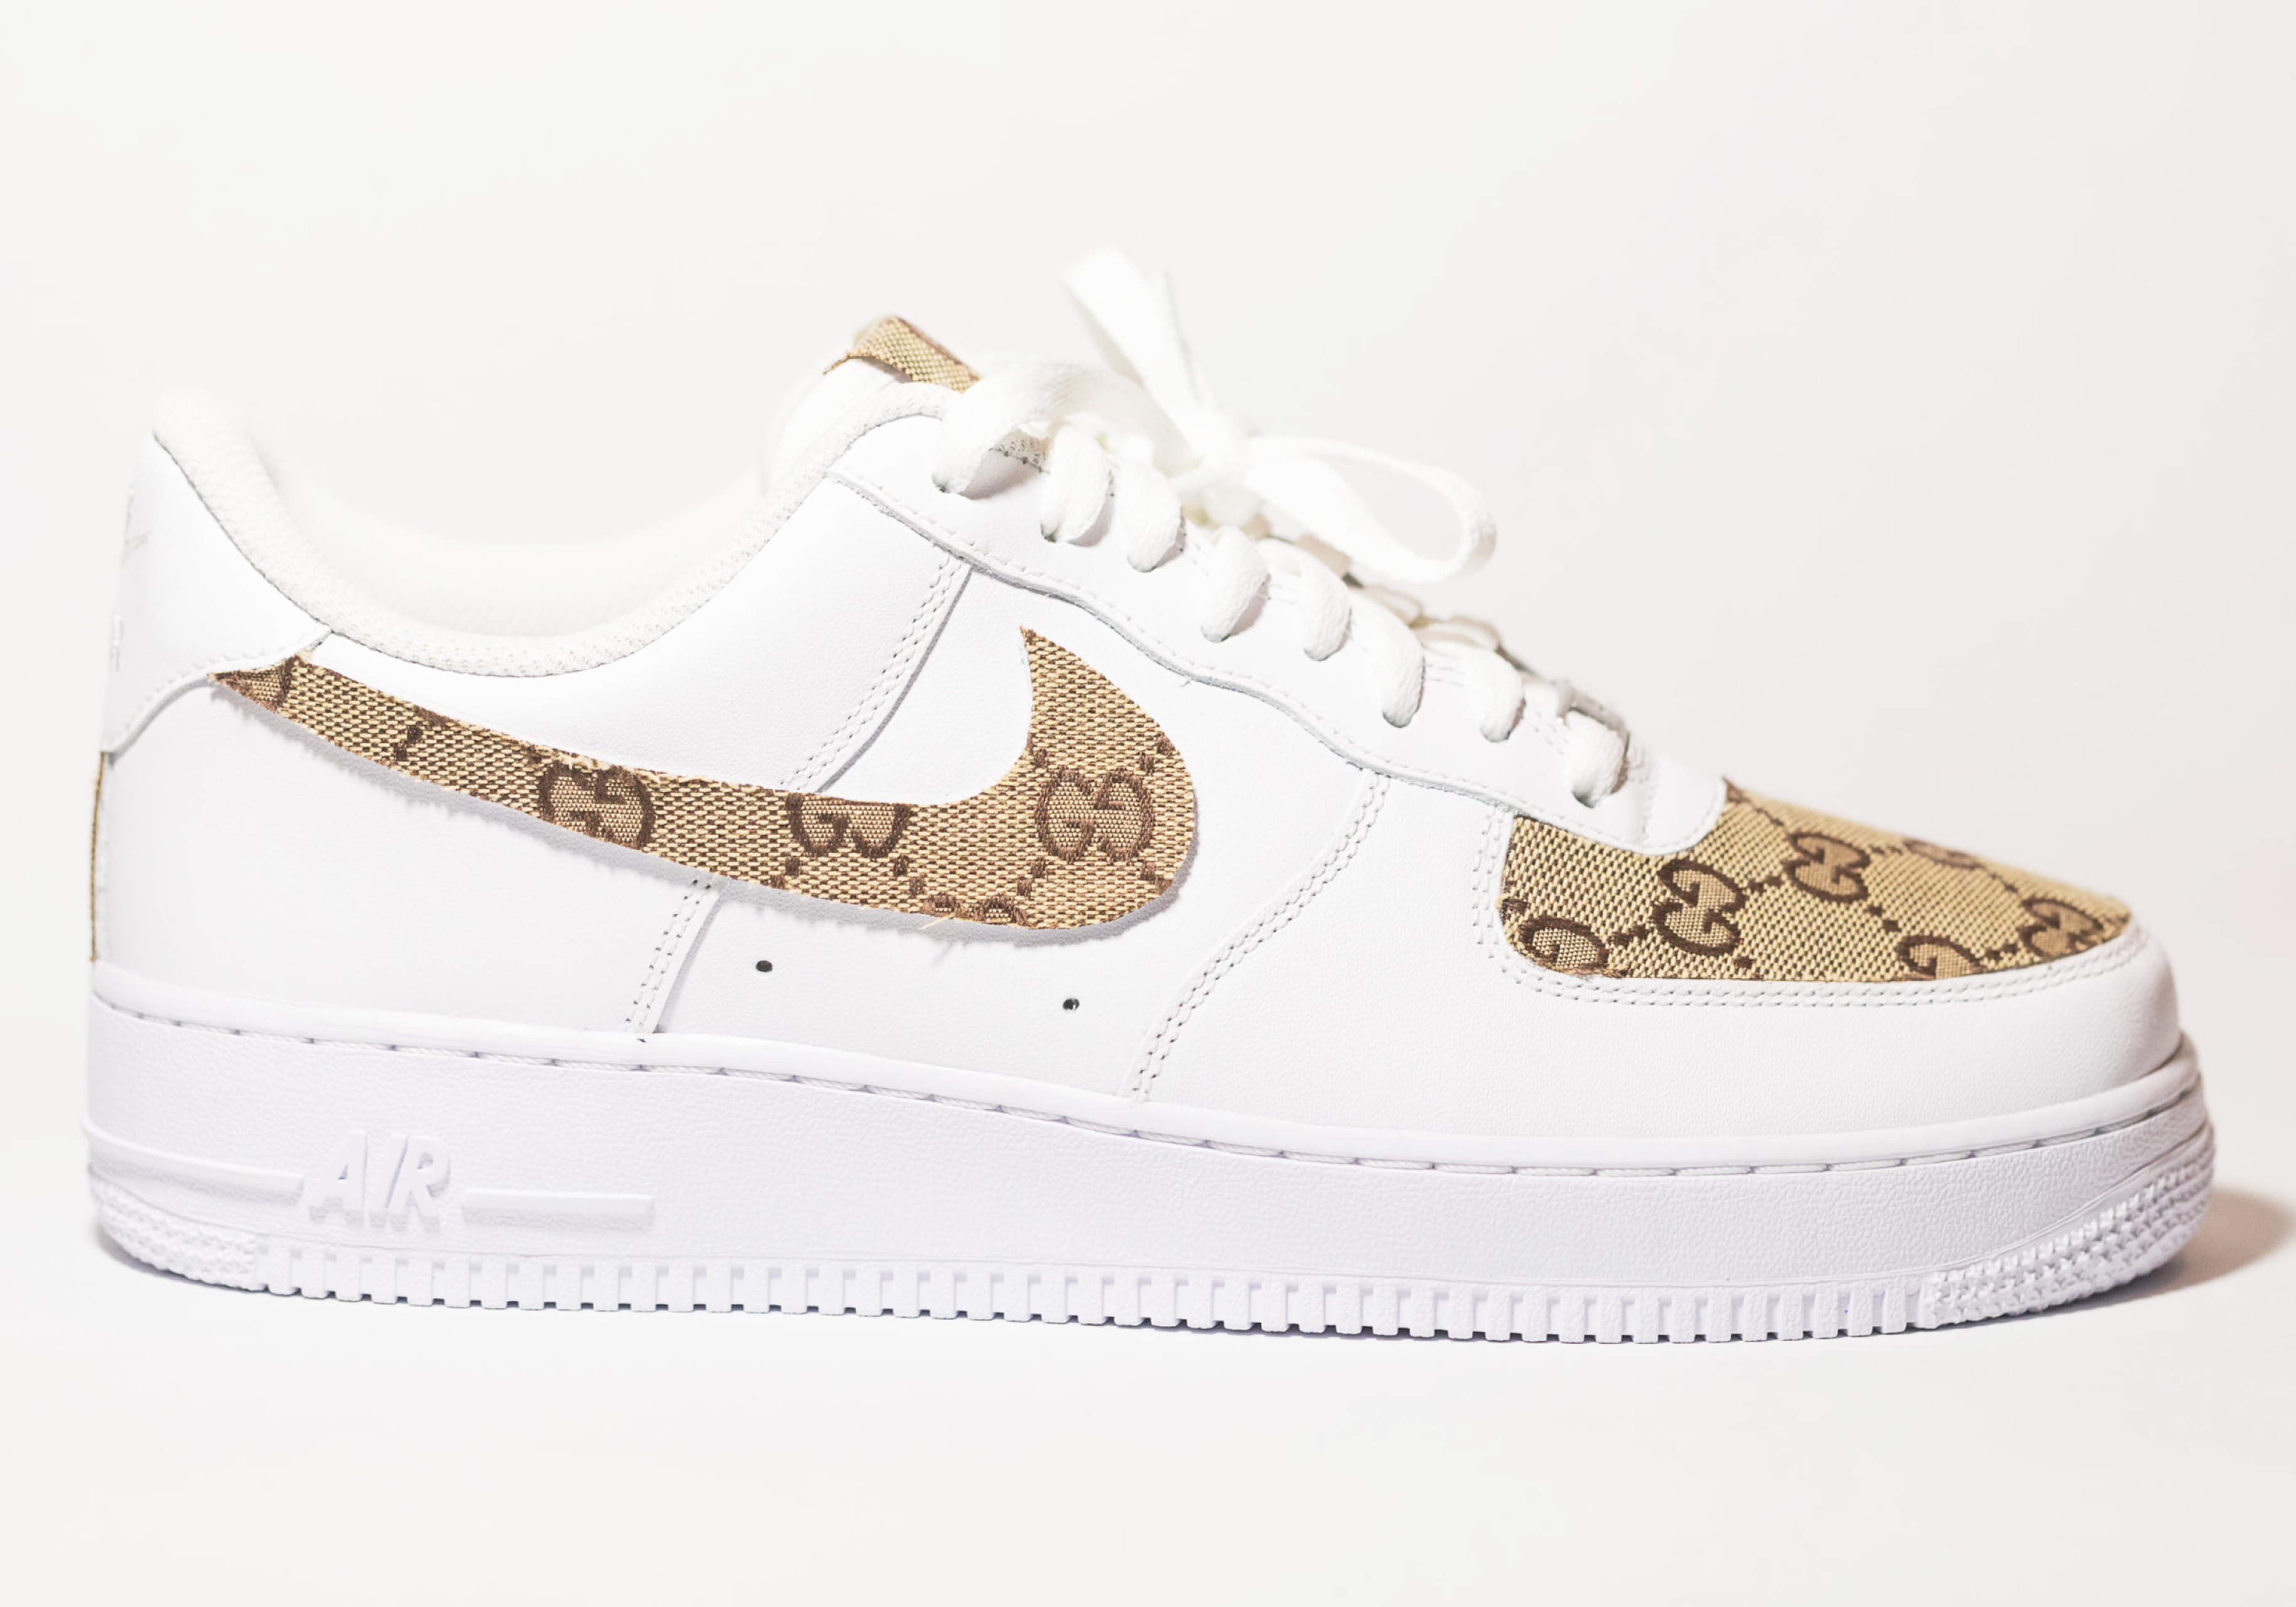 Post-impressionism payment egg Gucci Nike Air Force 1s Custom handmade Edition